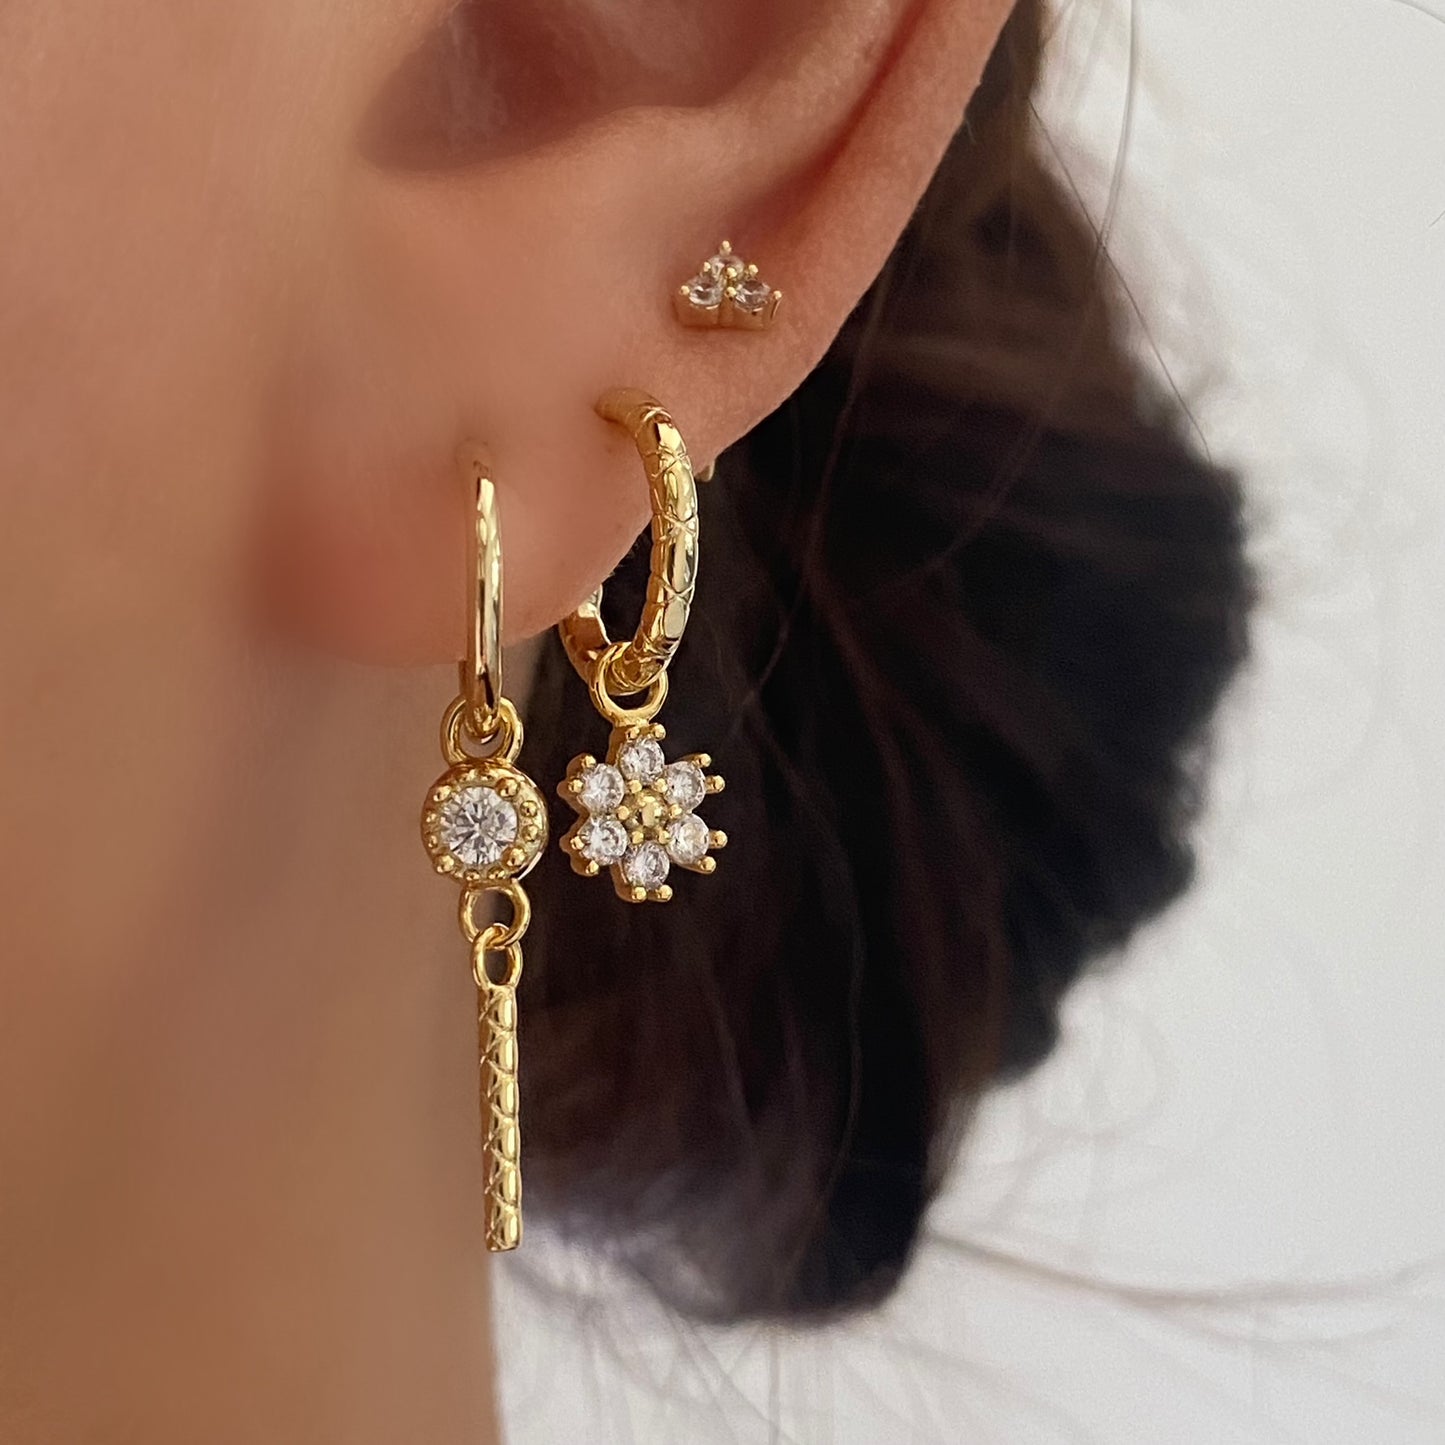 Flower Dangly Ear Stack Set, 925 Sterling Silver 3 pieces Gold Earring Set